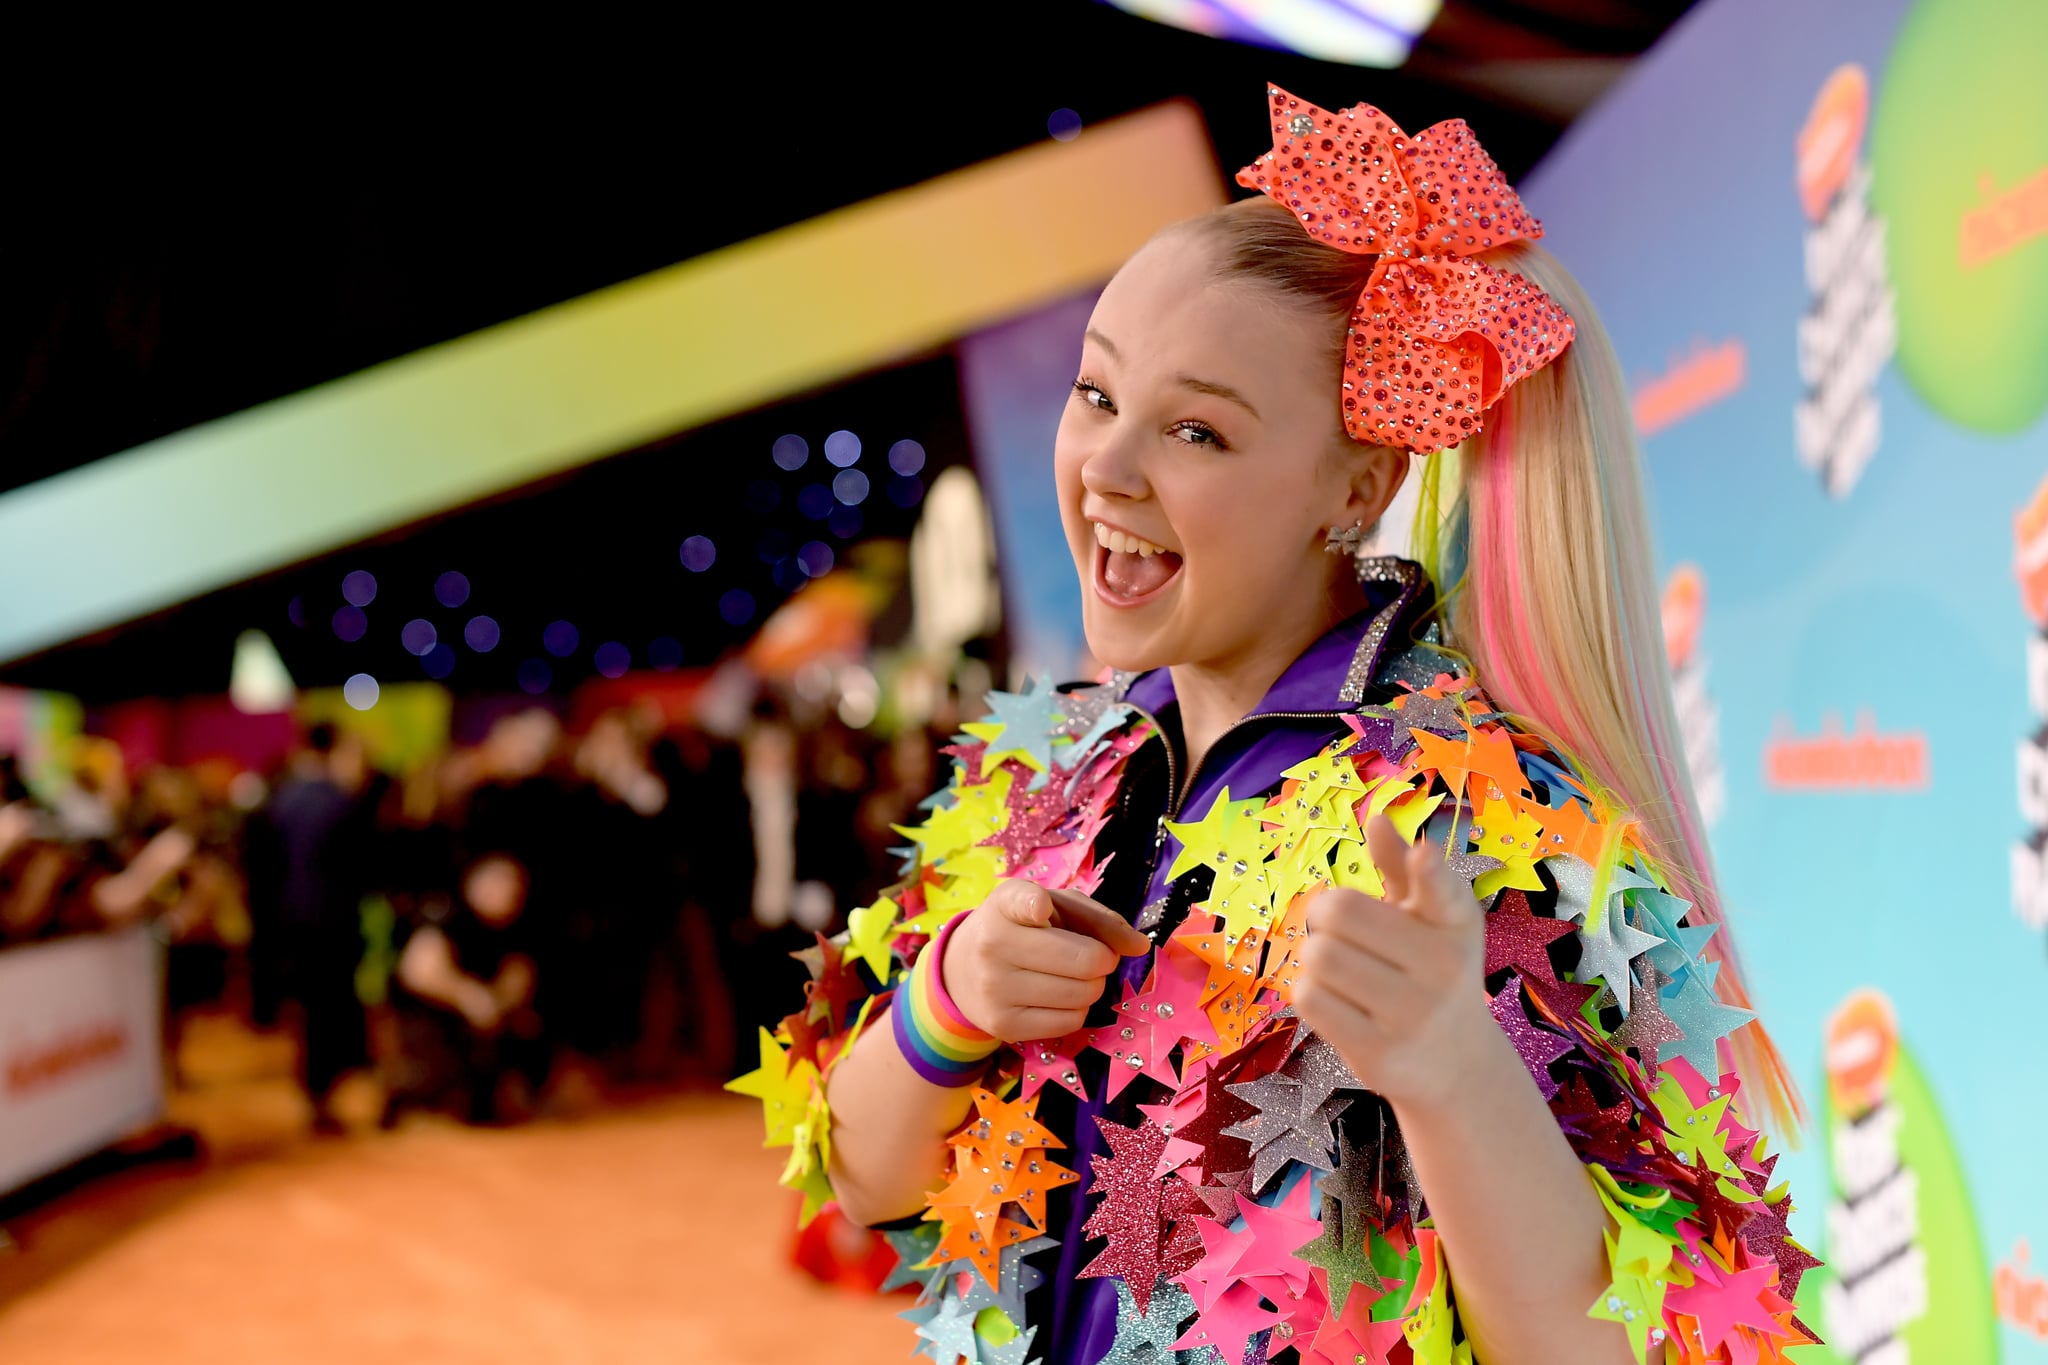 LOS ANGELES, CA - MARCH 23:  JoJo Siwa attends Nickelodeon's 2019 Kids' Choice Awards at Galen Center on March 23, 2019 in Los Angeles, California.  (Photo by Matt Winkelmeyer/Getty Images)